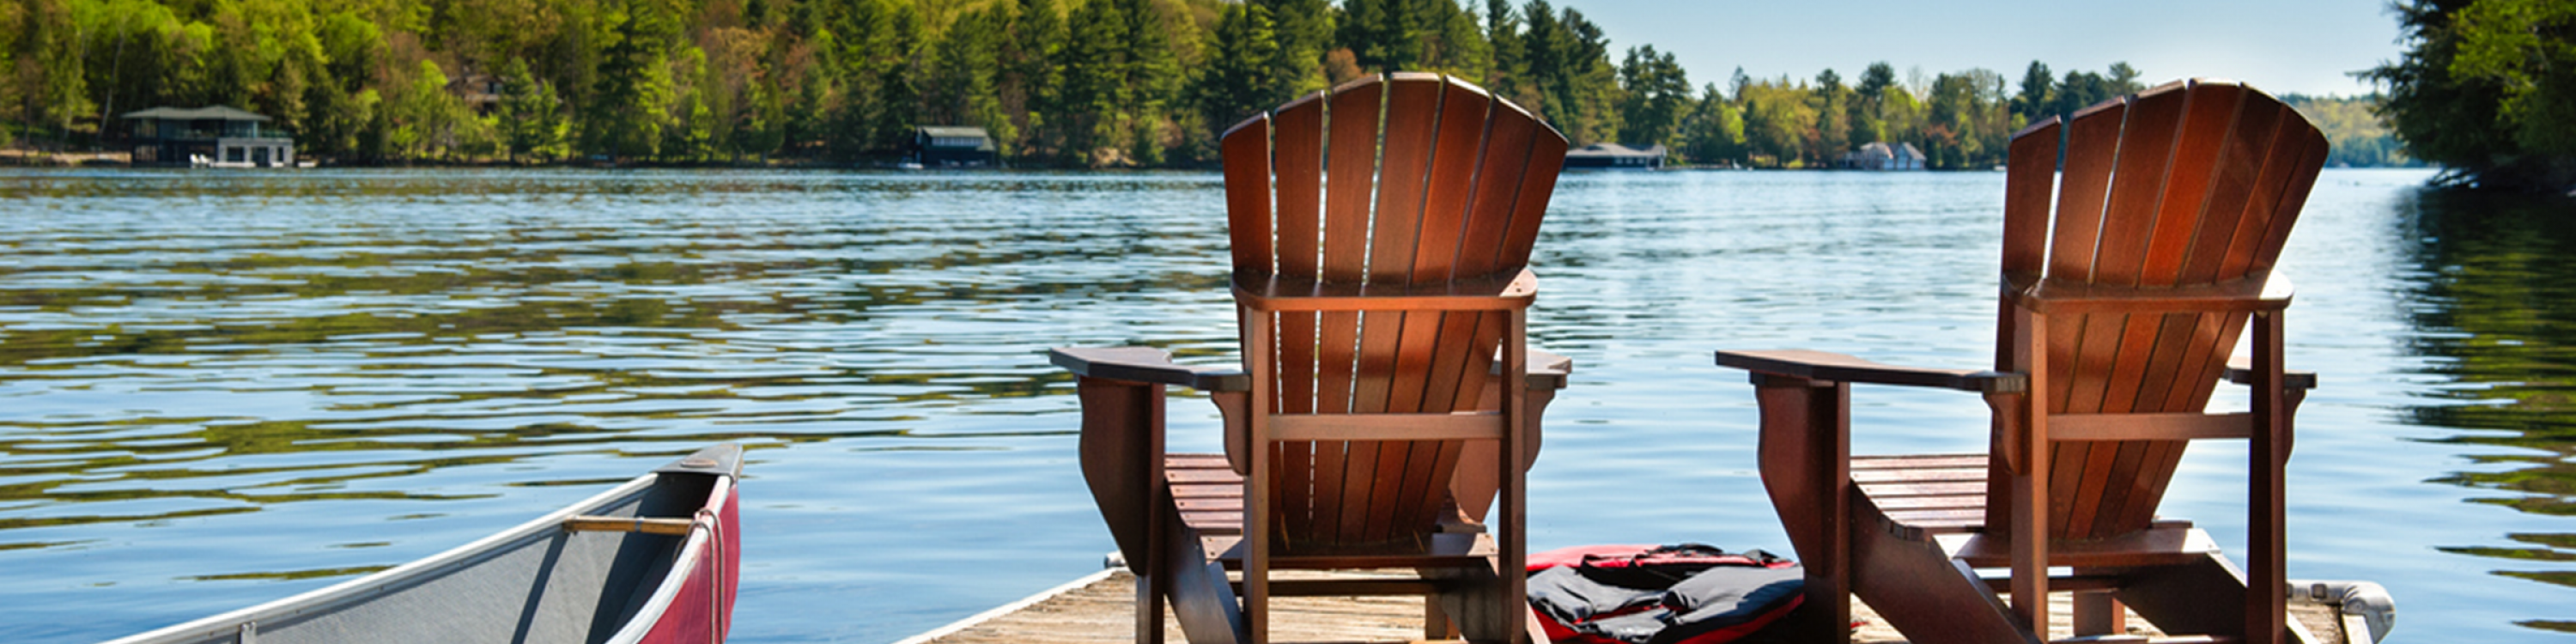 Two Muskoka chairs on a wooden dock overlooking the blue water of a lake in Muskoka, Ontario Canada. A red canoe is tied to the pier and life jackets are visible near the chairs.